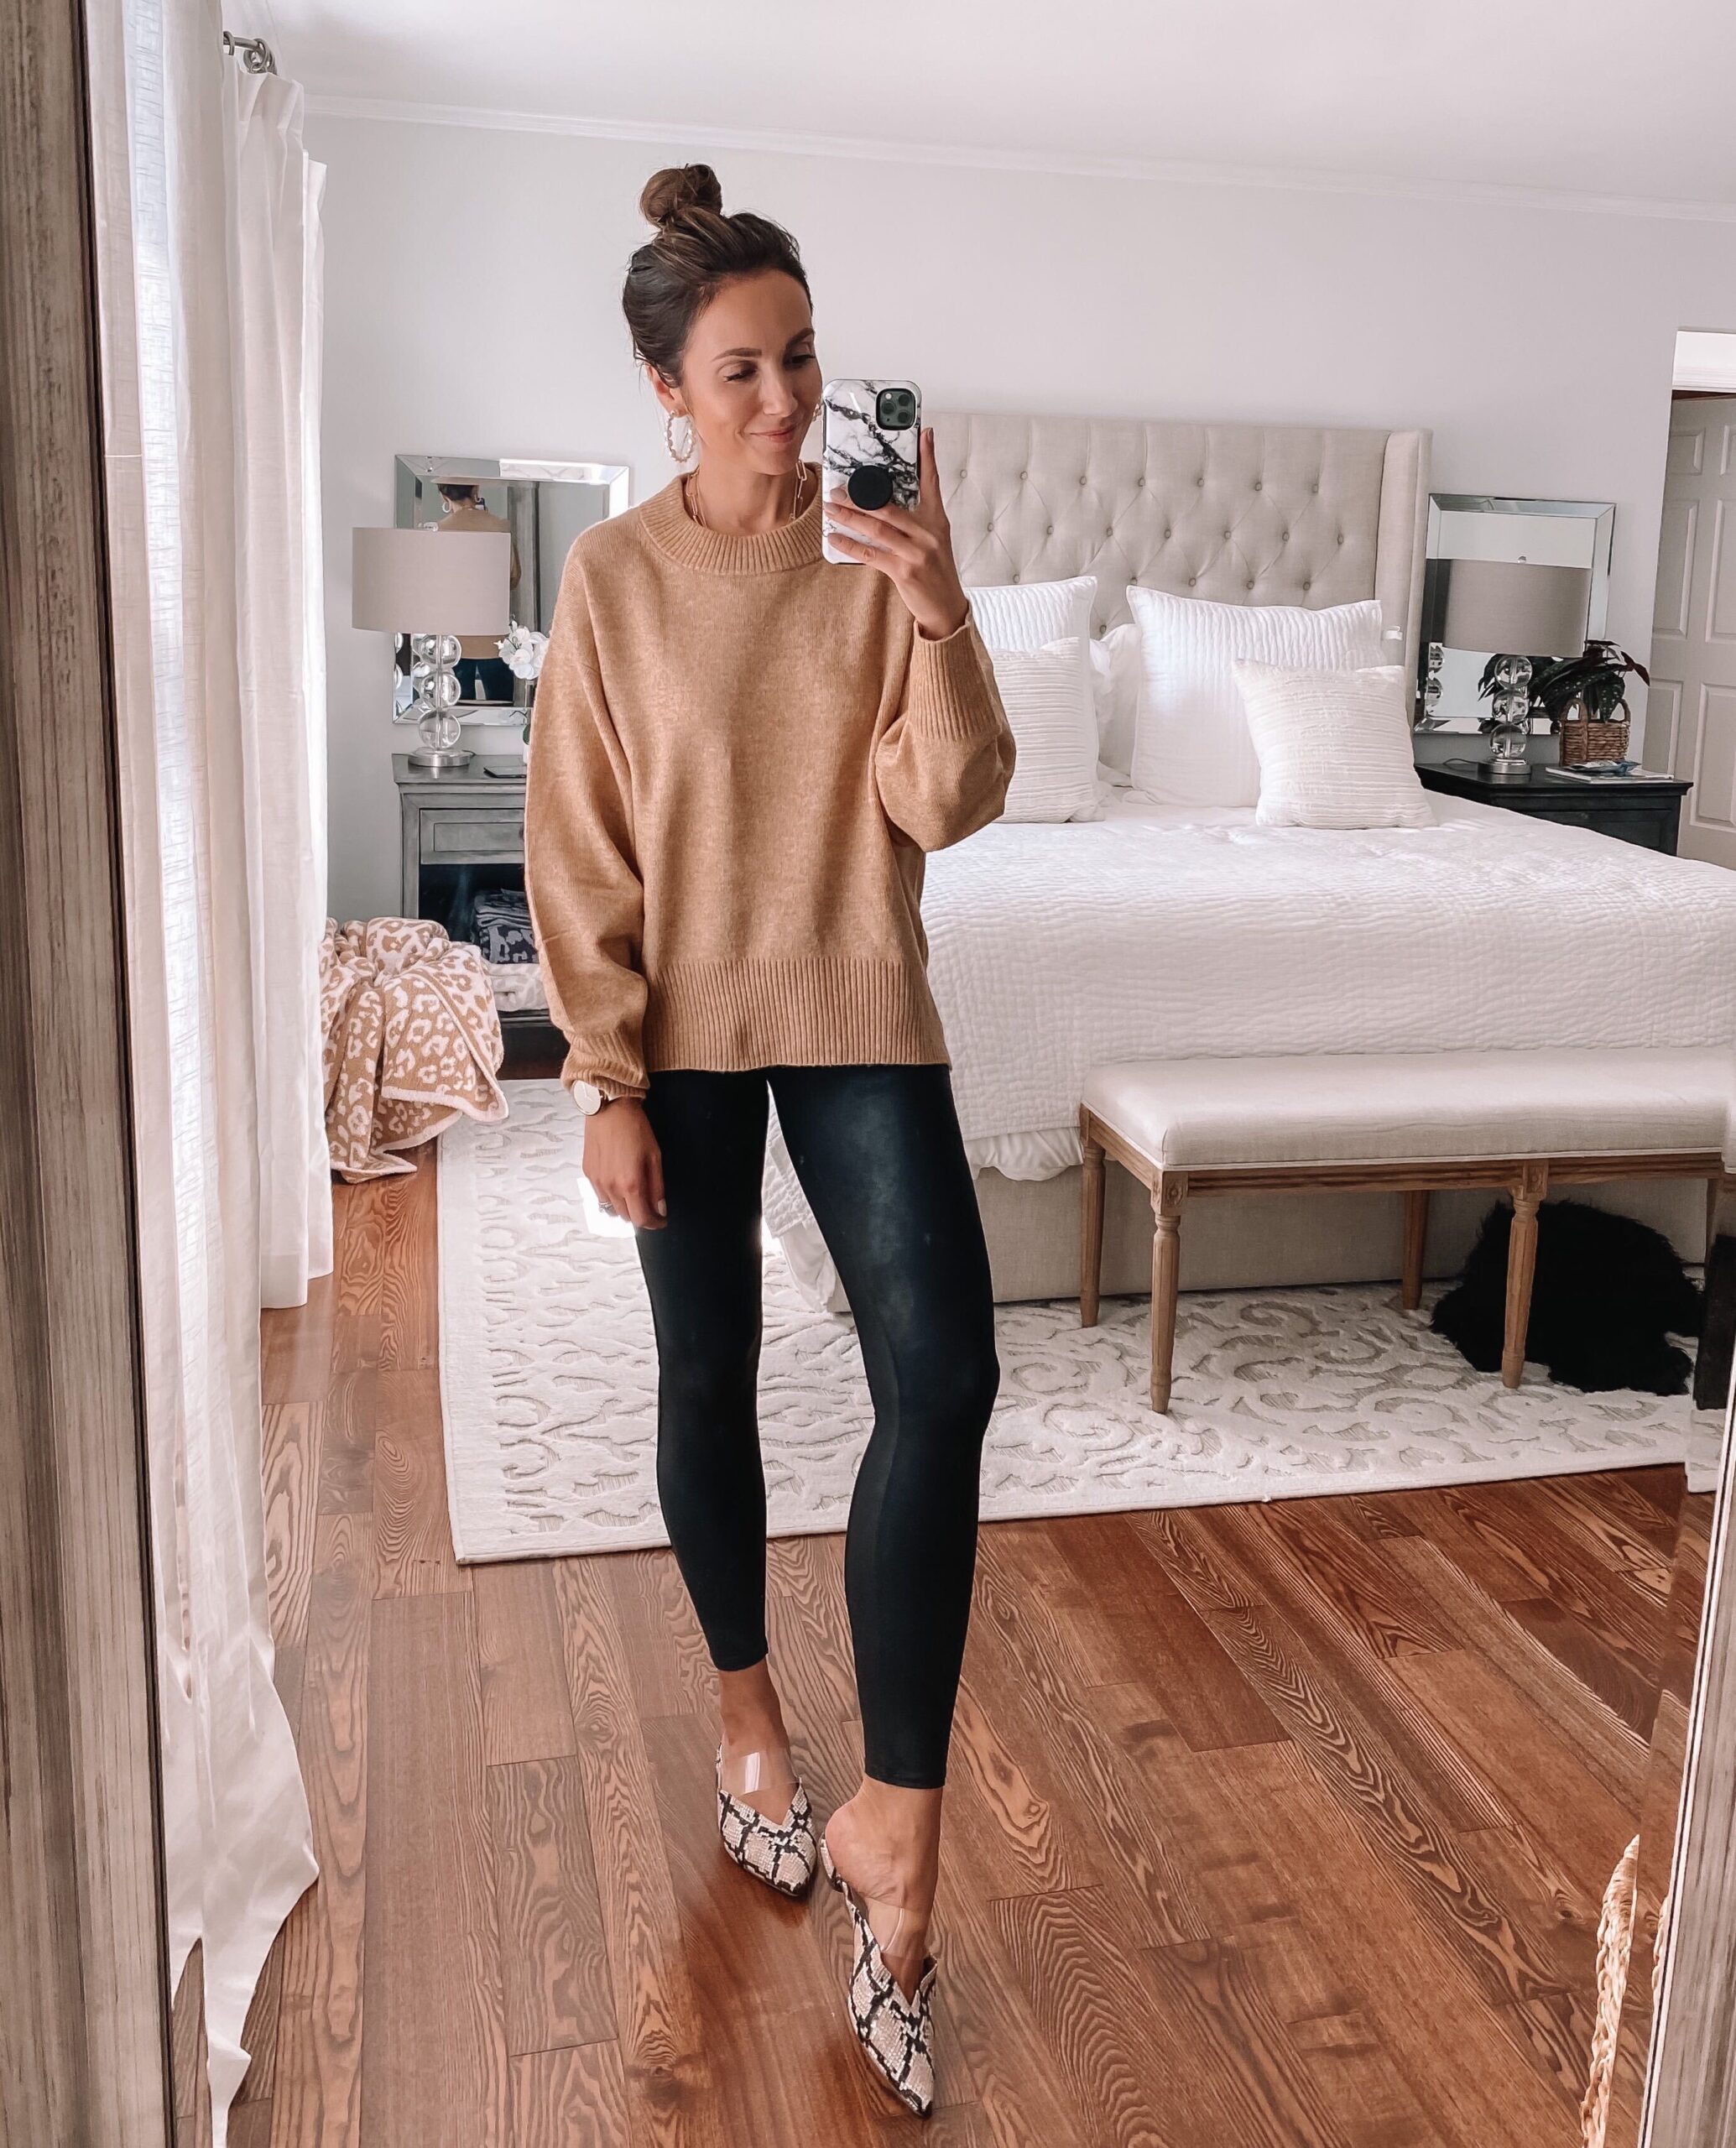 target finds, oversized sweater, faux leather leggings, fall outfit idea